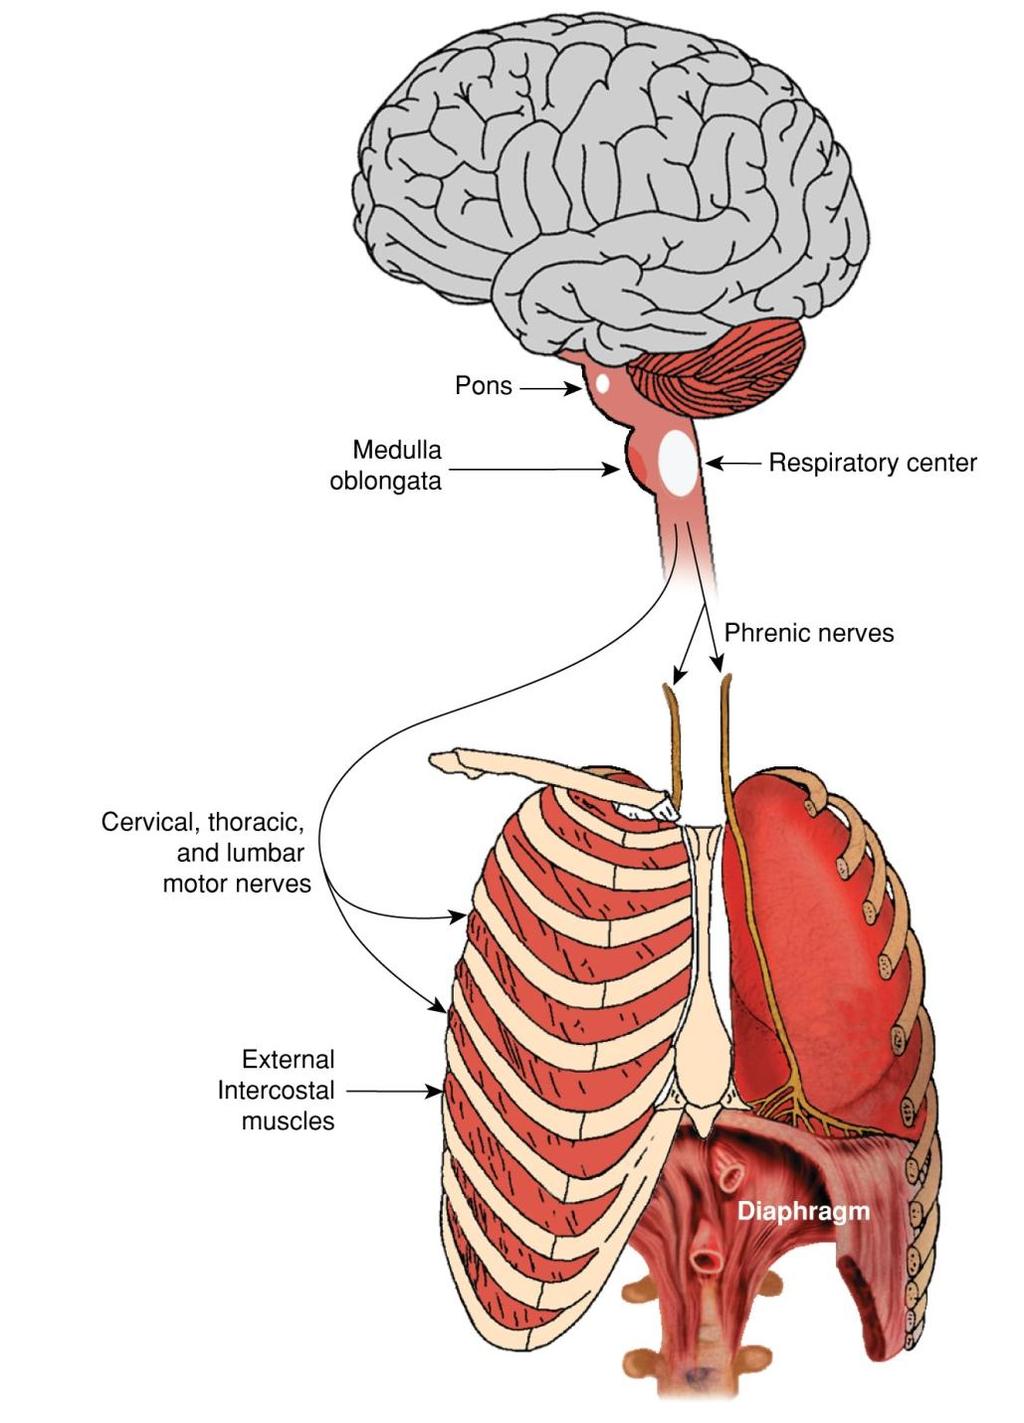 Neural Impulses from the Respiratory Center Fig.9-2.